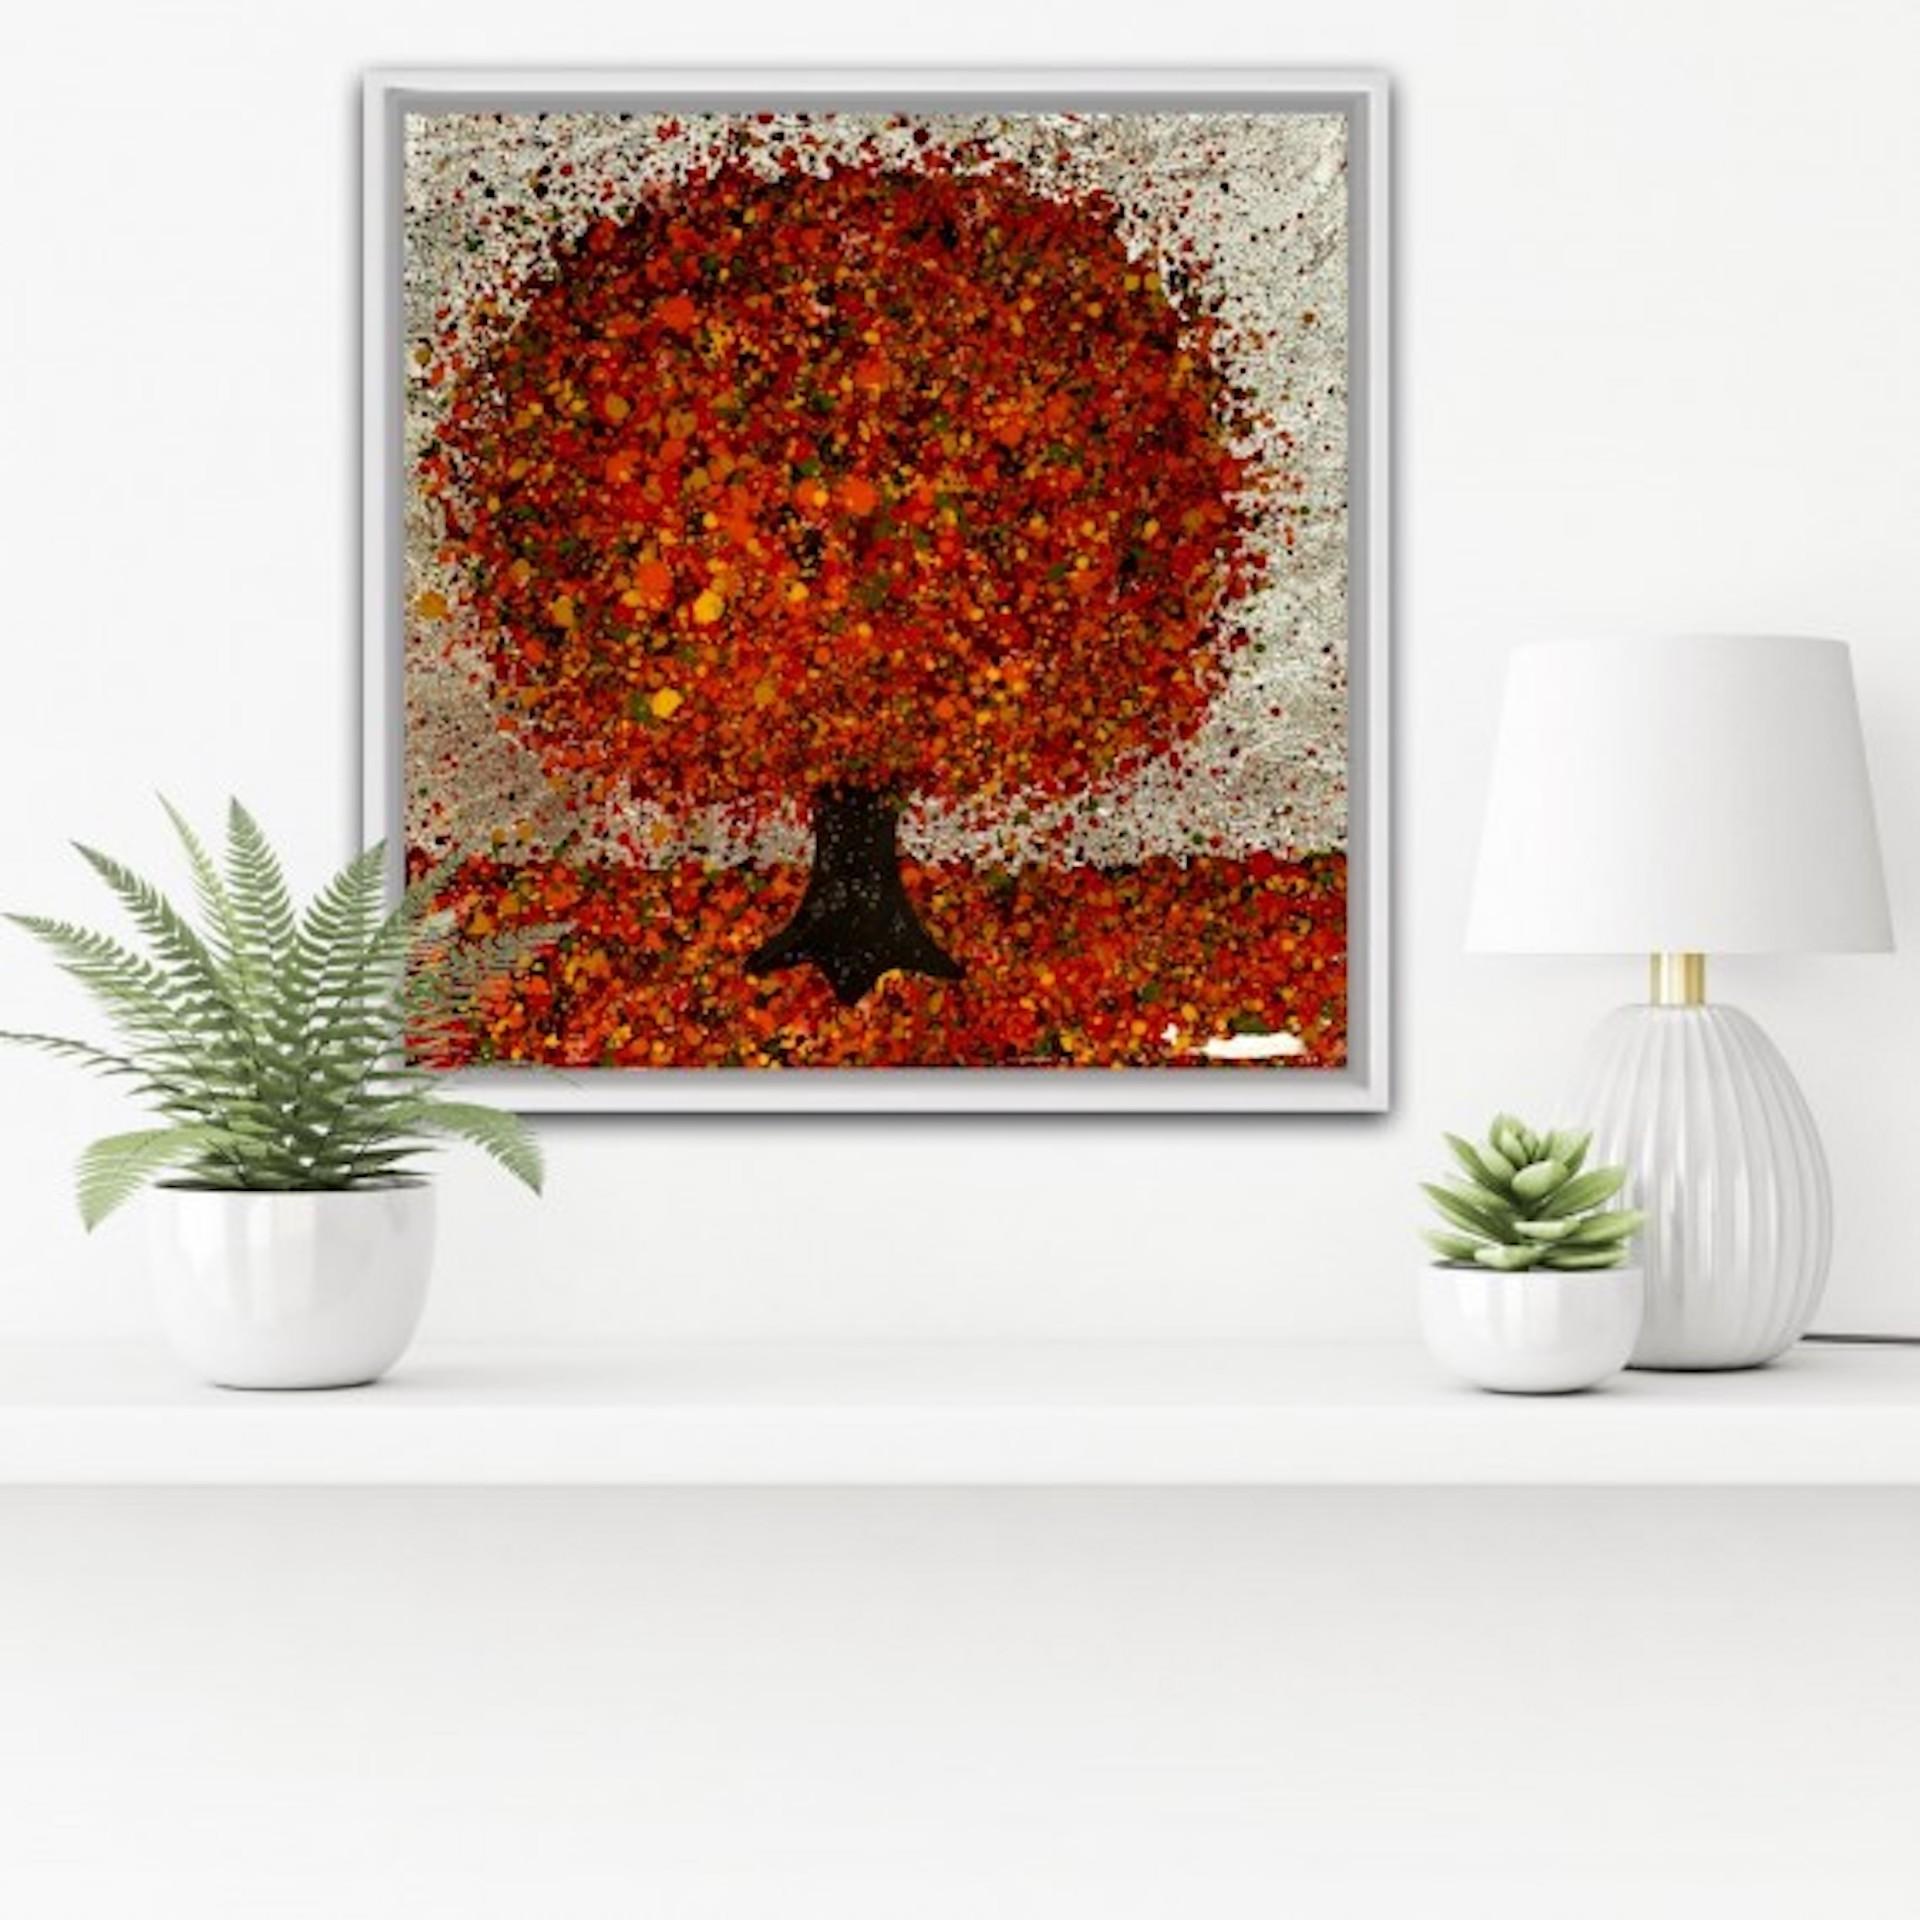 A Sparkling Autumn Day, Nicky Chubb, Original Painting, Floral Tree Landscape For Sale 1